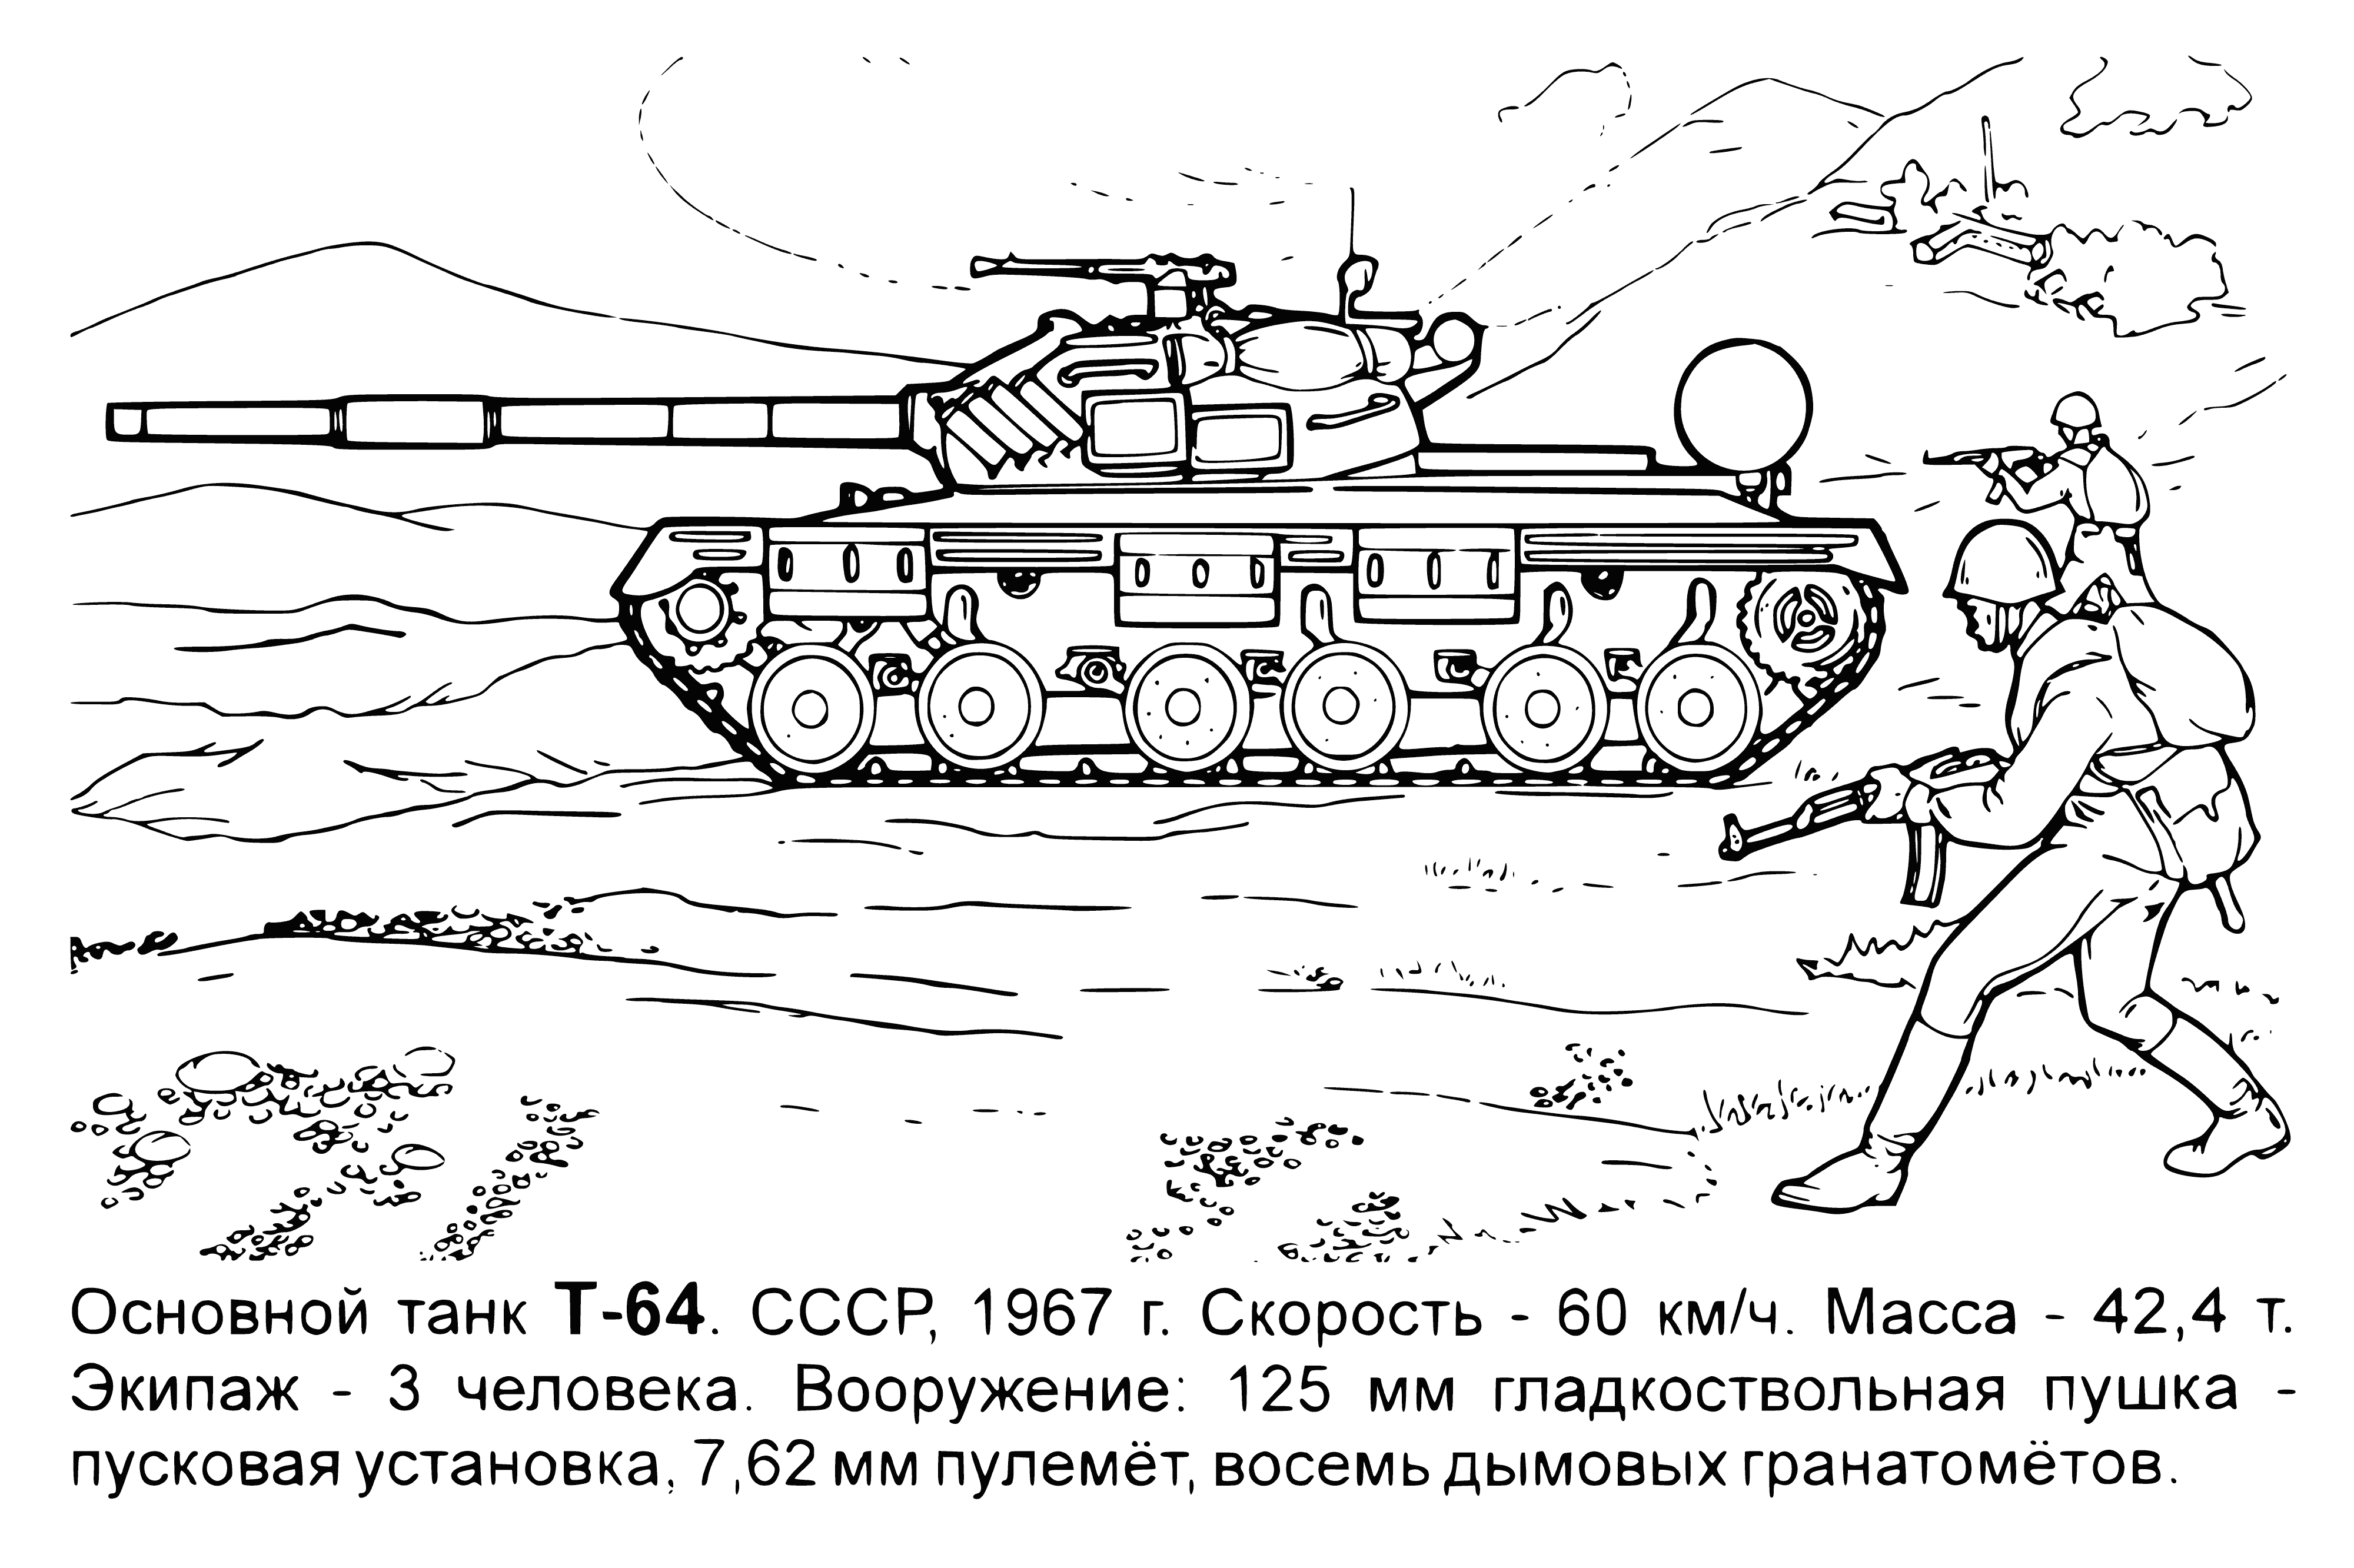 coloring page: Soviet tank is a combat vehicle w/ powerful engine, thick armor & turret w/ large gun, designed for front-line combat.